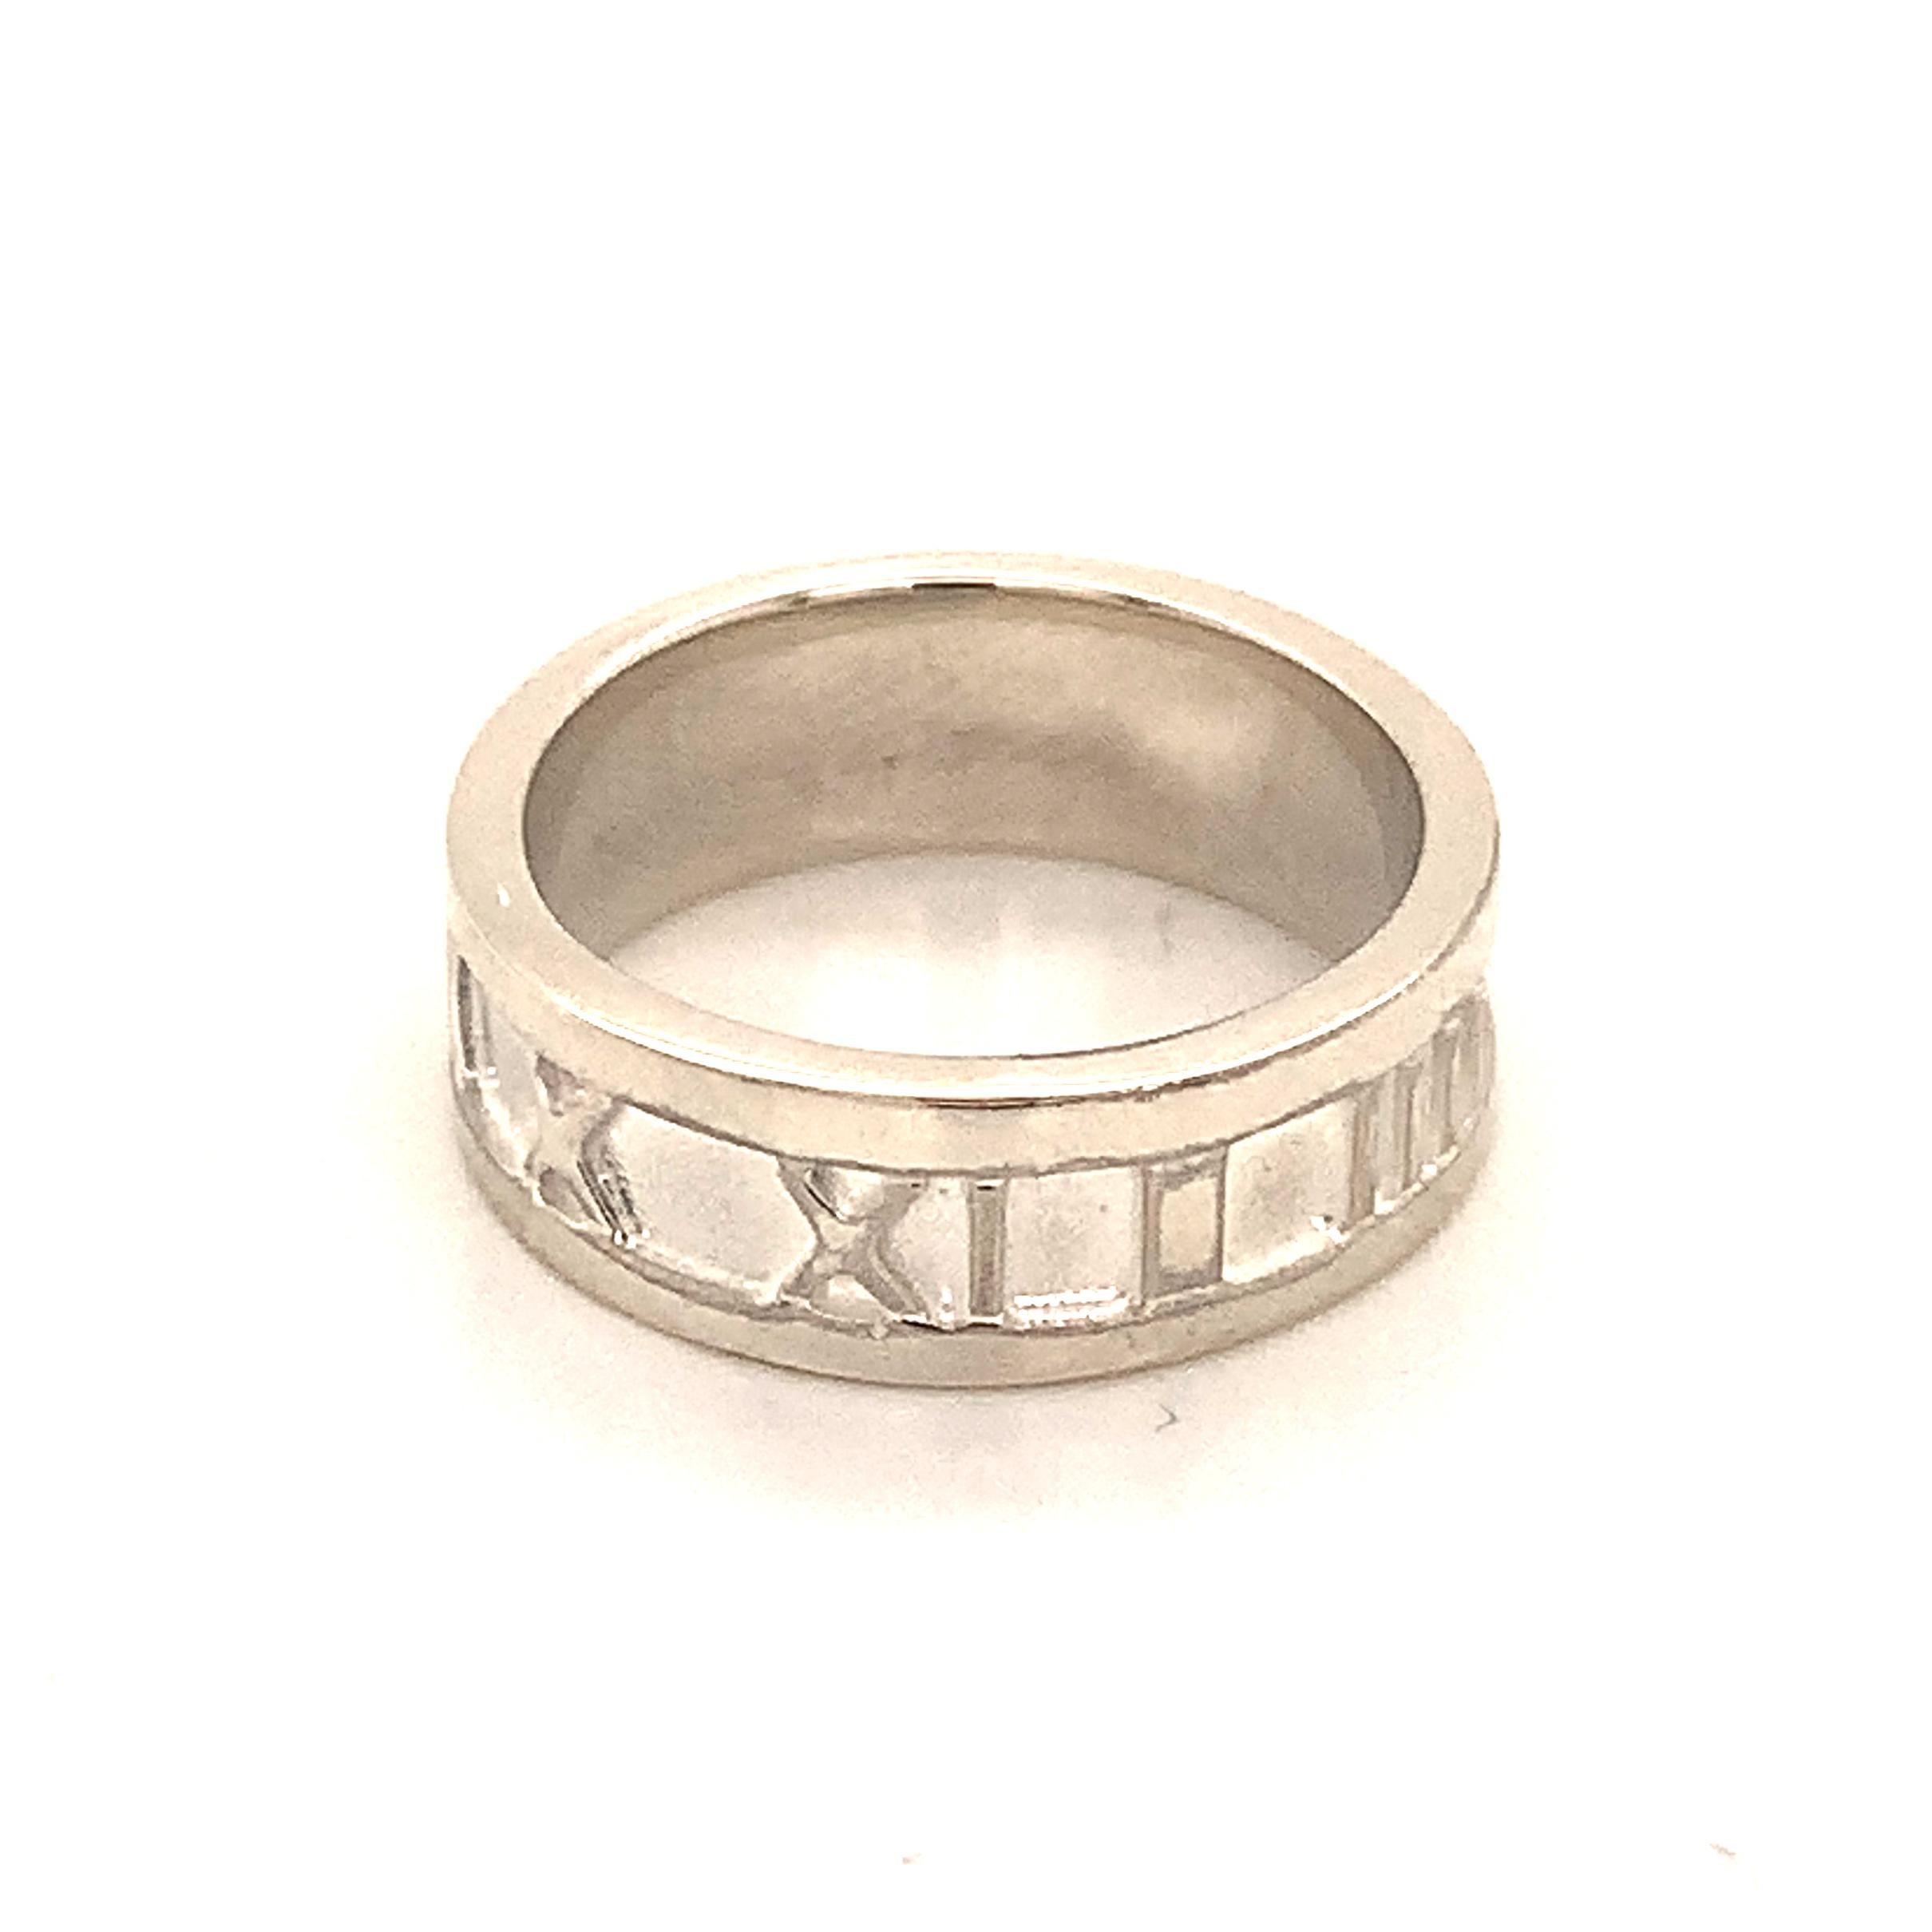 Tiffany & Co. Estate Ring Sterling Silver 4.2 Grams In Good Condition For Sale In Brooklyn, NY